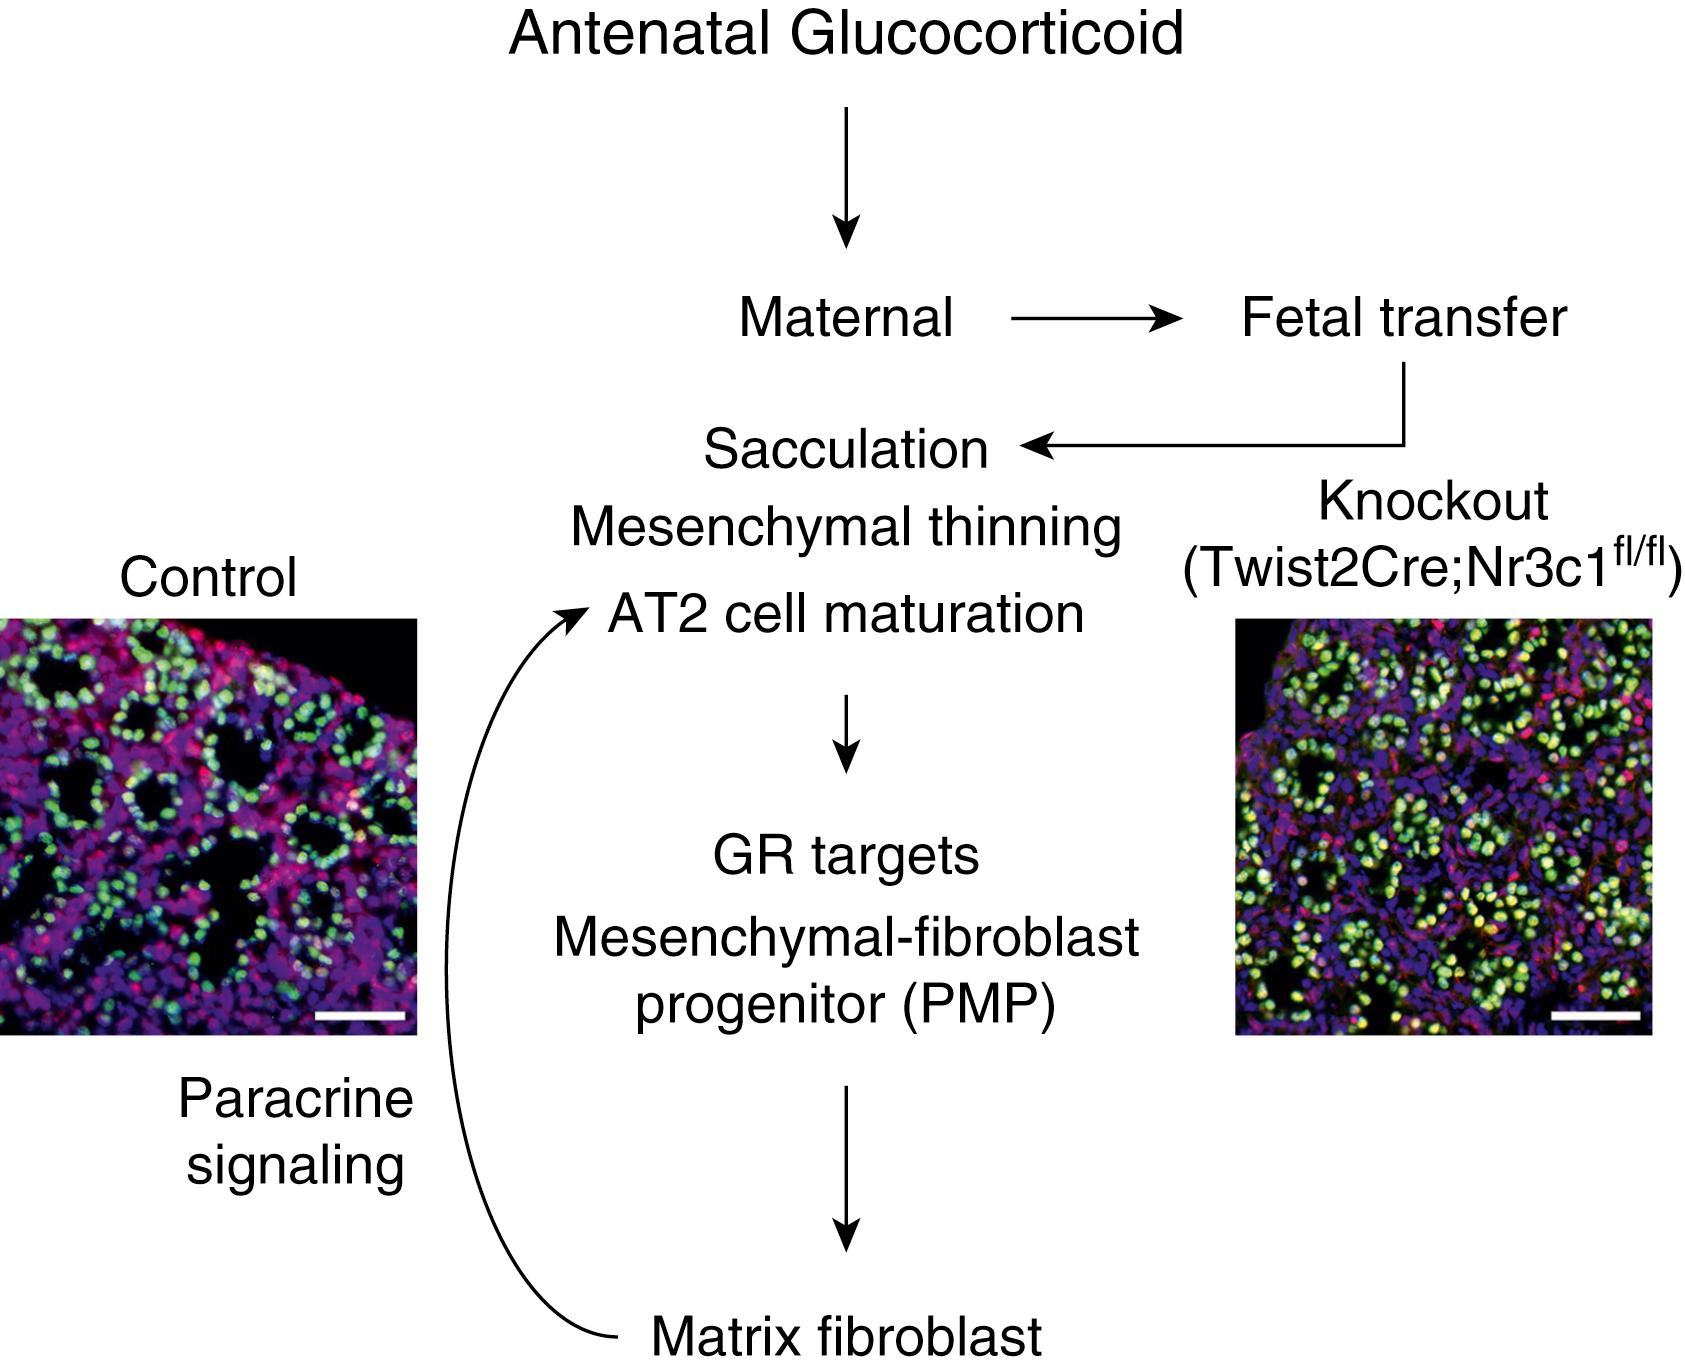 Fig. 157.4, Antenatal glucocorticoid signaling of fetal lung maturation. Based on new information from transgenic mouse models. 47 The figure illustrates that the induction of lung maturation primarily is through a newly identified mesenchymal precursor cell through a mesenchymal fibroblast to the surfactant producing Type 2 cells. Sketch based on. 47 Tissue was stained for Thyroid transcription factor-1 (TTF-1) in epithelial cells (green) , Glucocorticoid receptor (GR) in red and DAPI dye for nuclei.